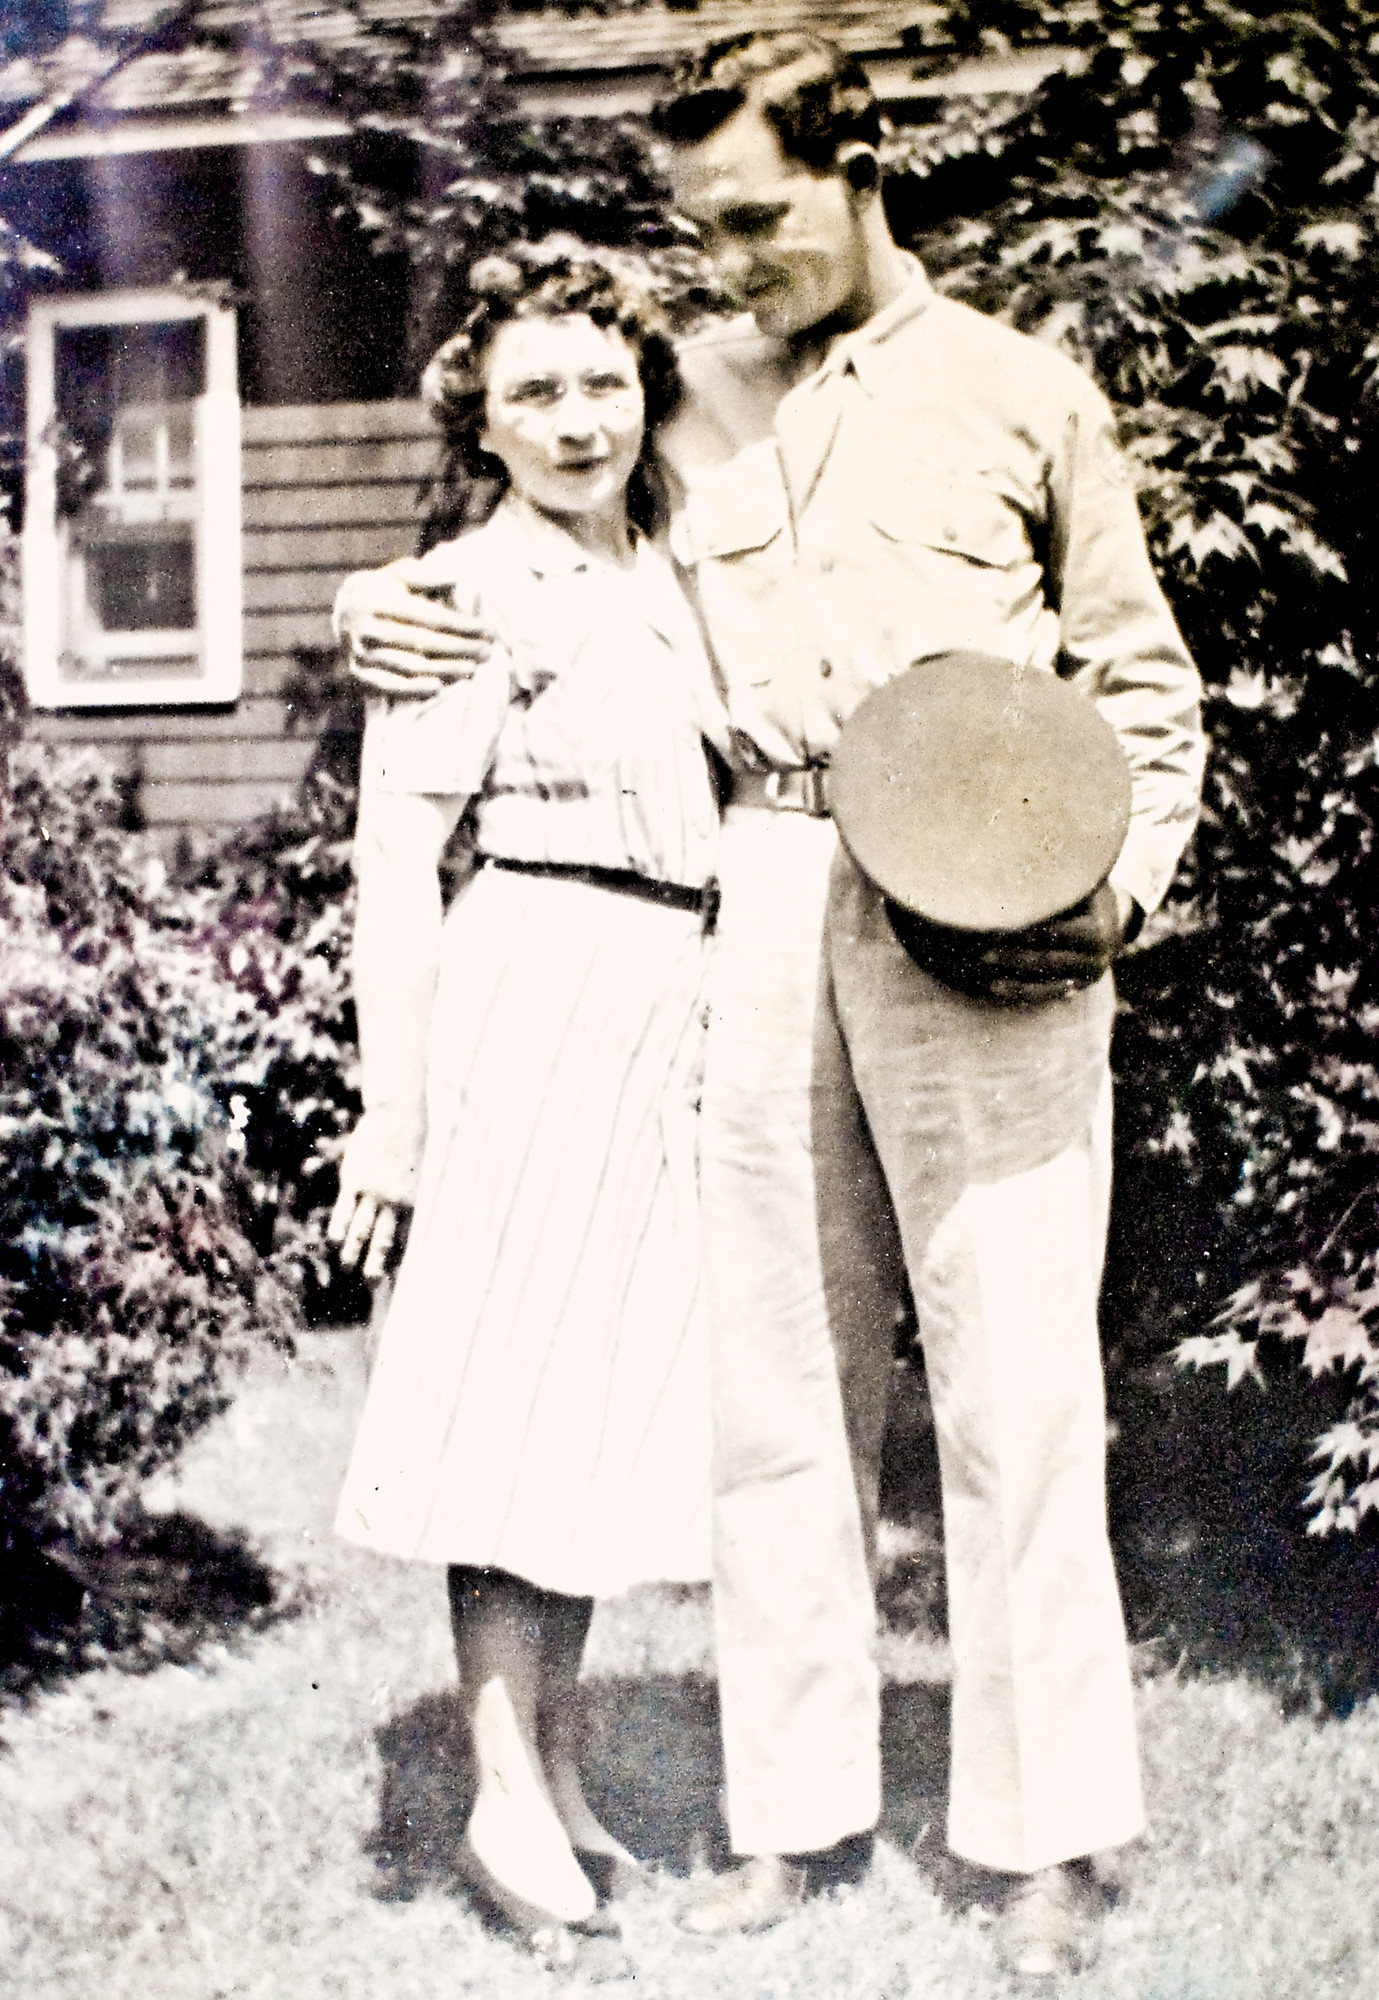 Wieboldt with his mother, Emma, at their Kenny Avenue home in Merrick during World War II.